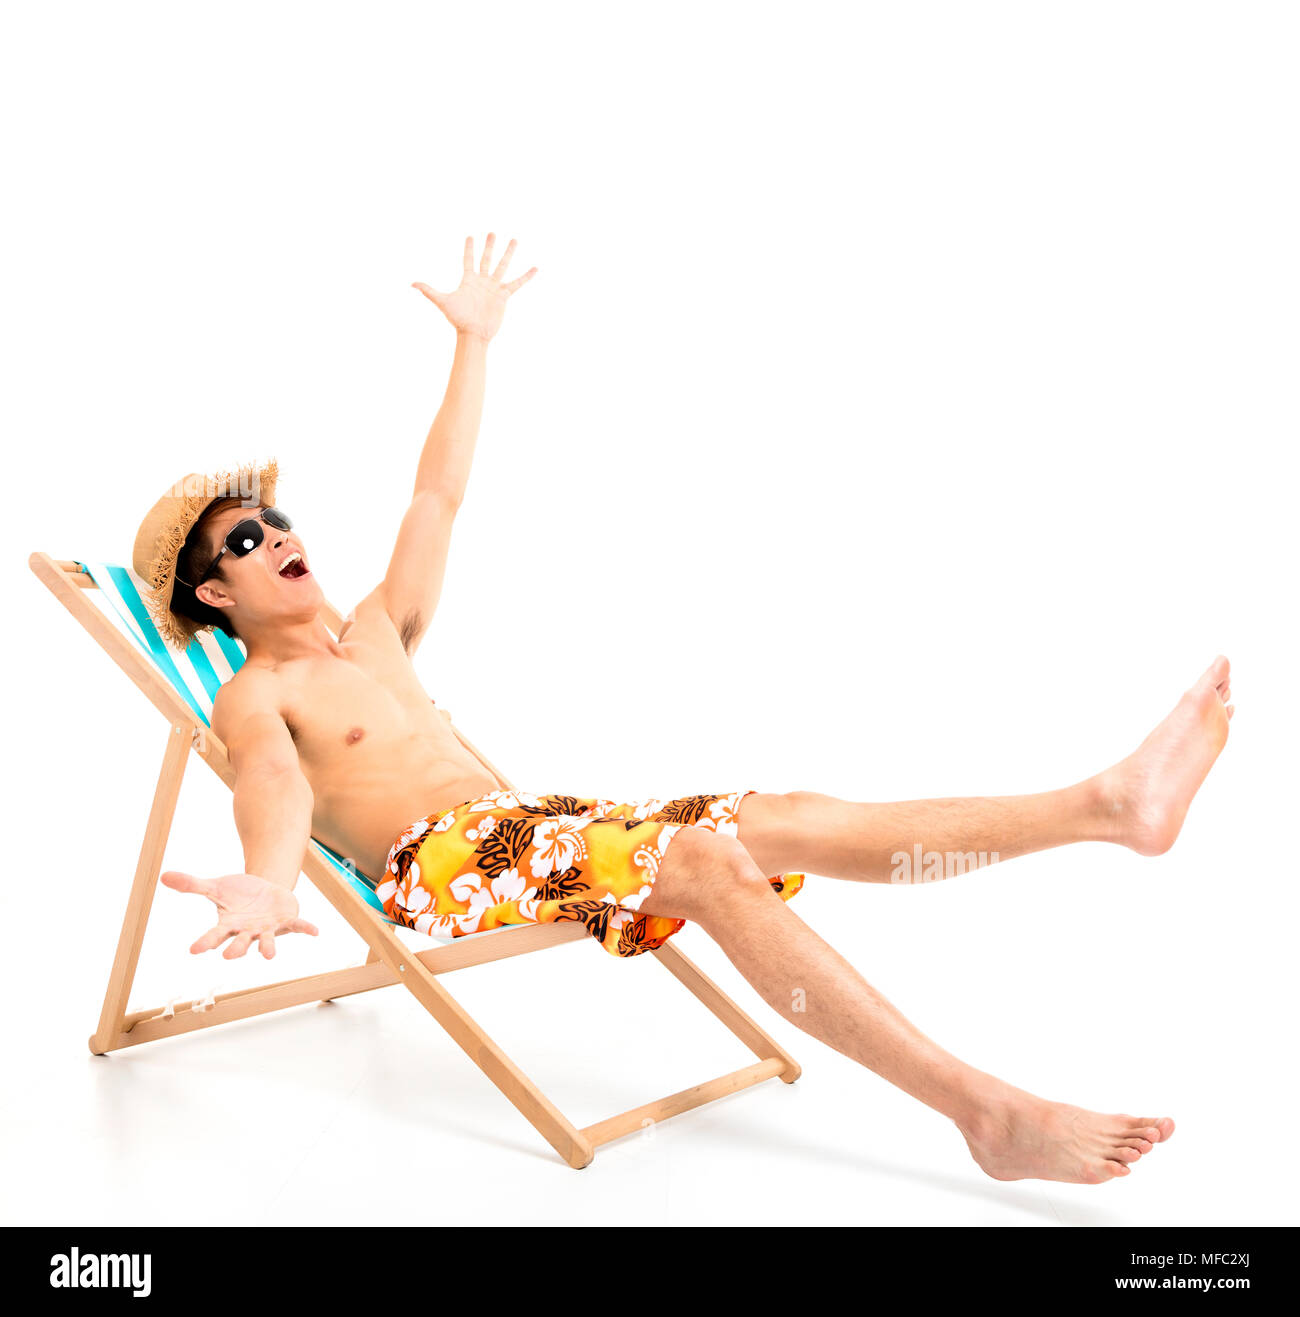 surprised and excited man sitting in lounger chair Stock Photo